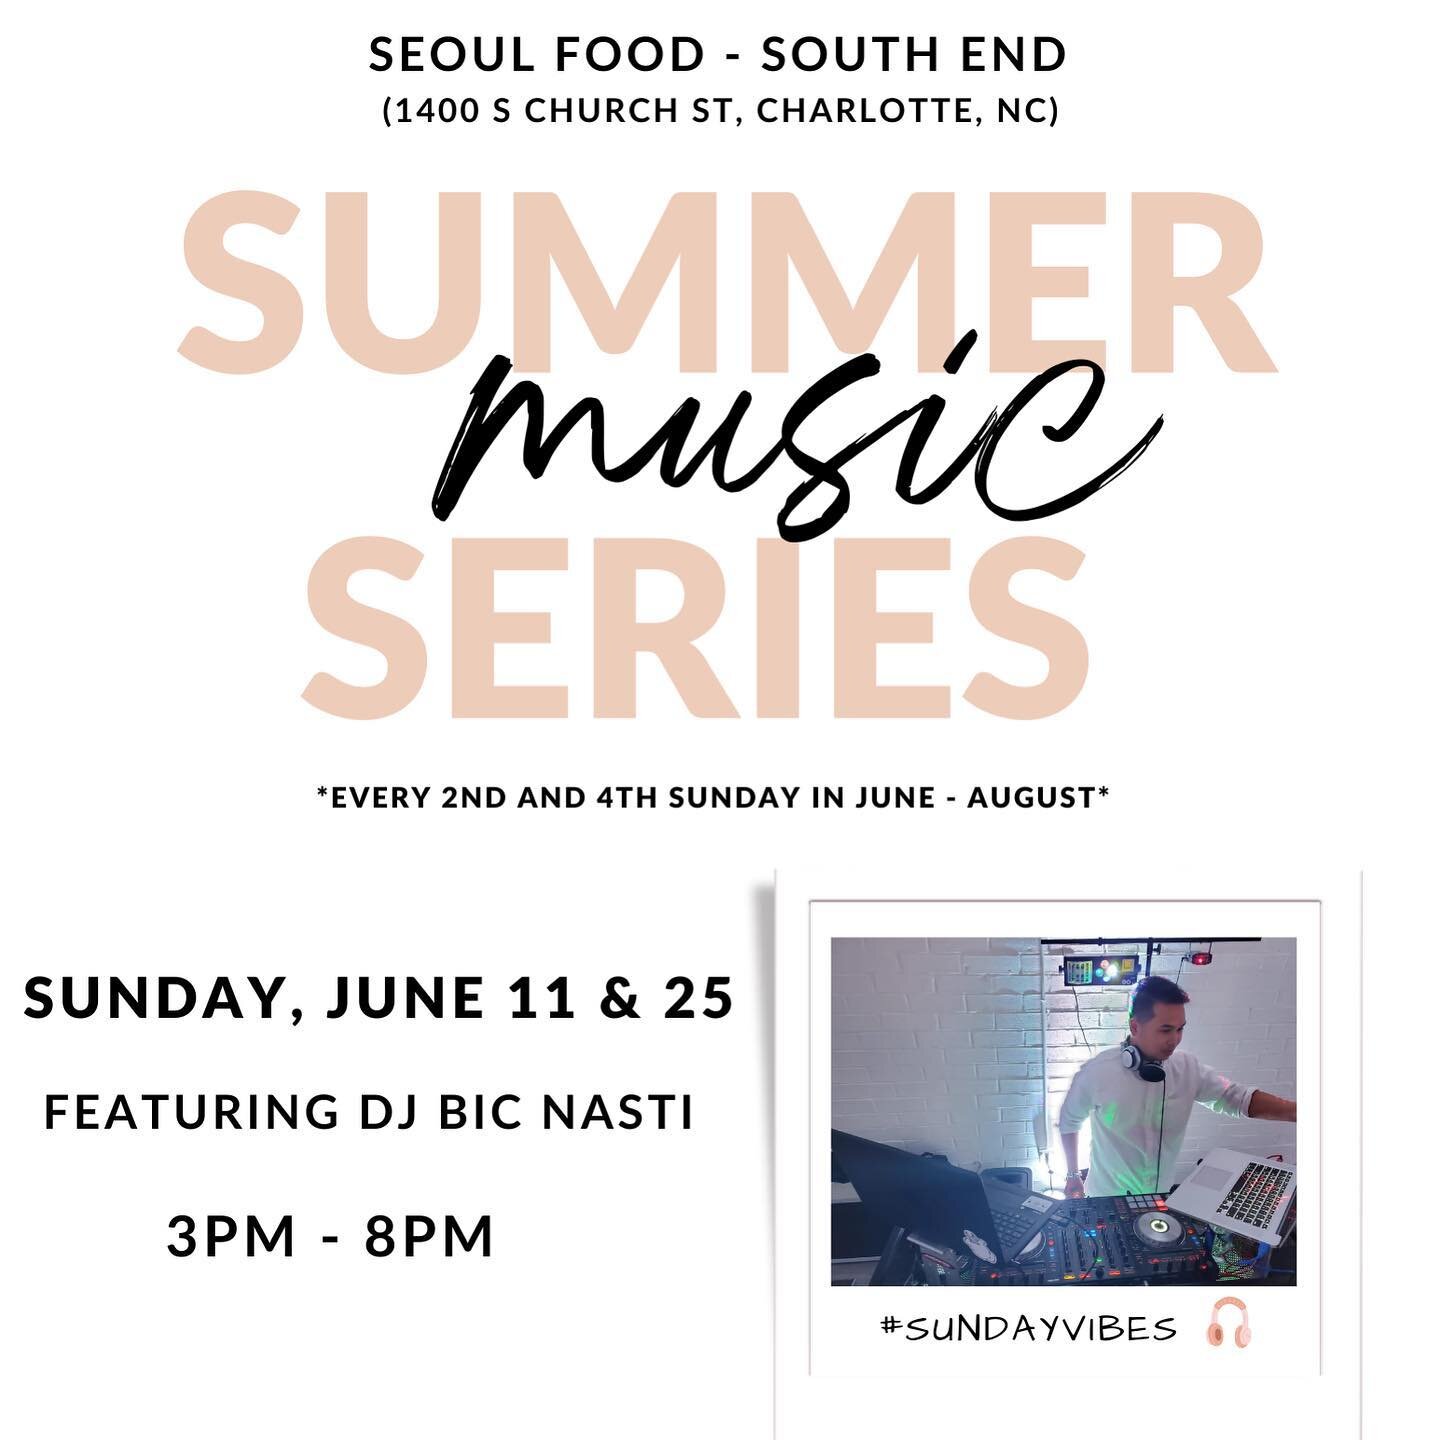 🎶 Our Summer Music Series continues! Seoul Food - South End (1400 Church St) will host local DJ&rsquo;s from 3-8pm on the back patio bar, every 2nd and 4th Sunday until Labor Day. 
.
🎧 DJ Bic Nasti
🍹Food and drinks by Seoul Food 
🐾 Dog park open 